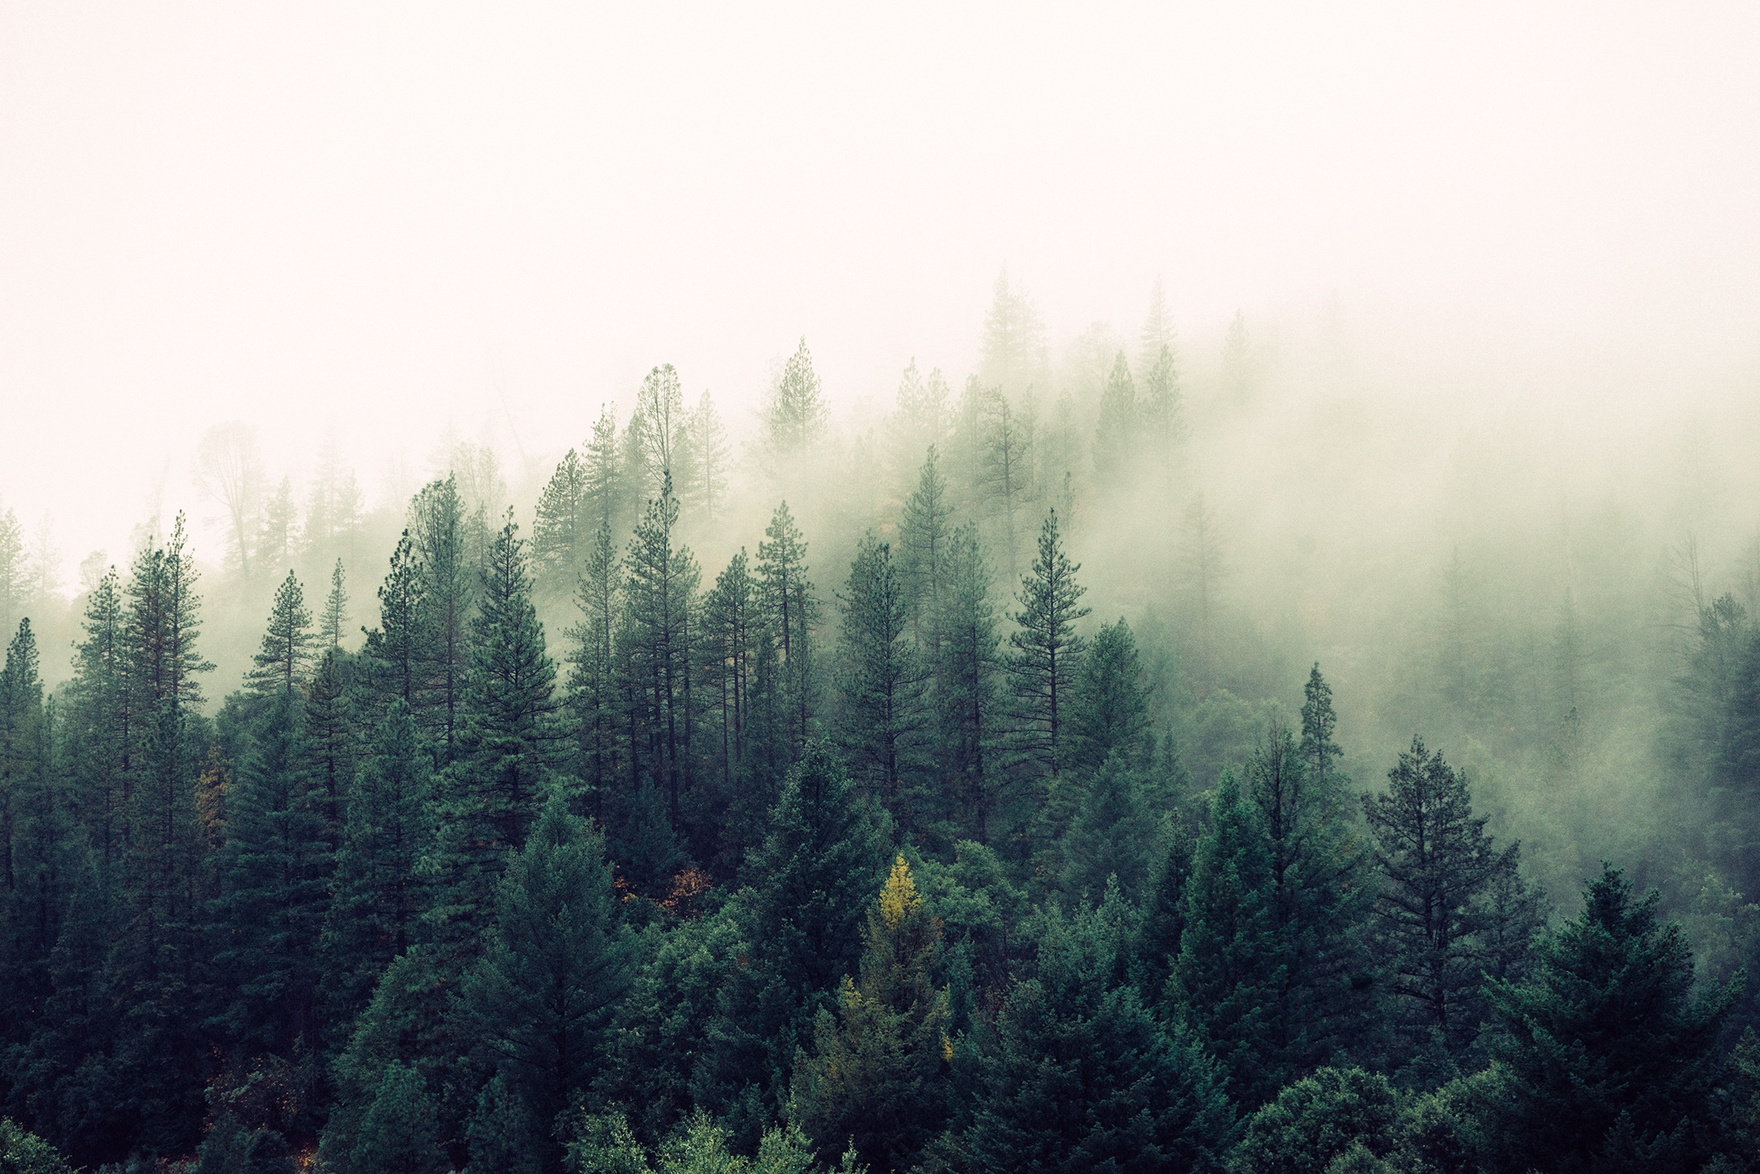 Trees in a Misty Forest